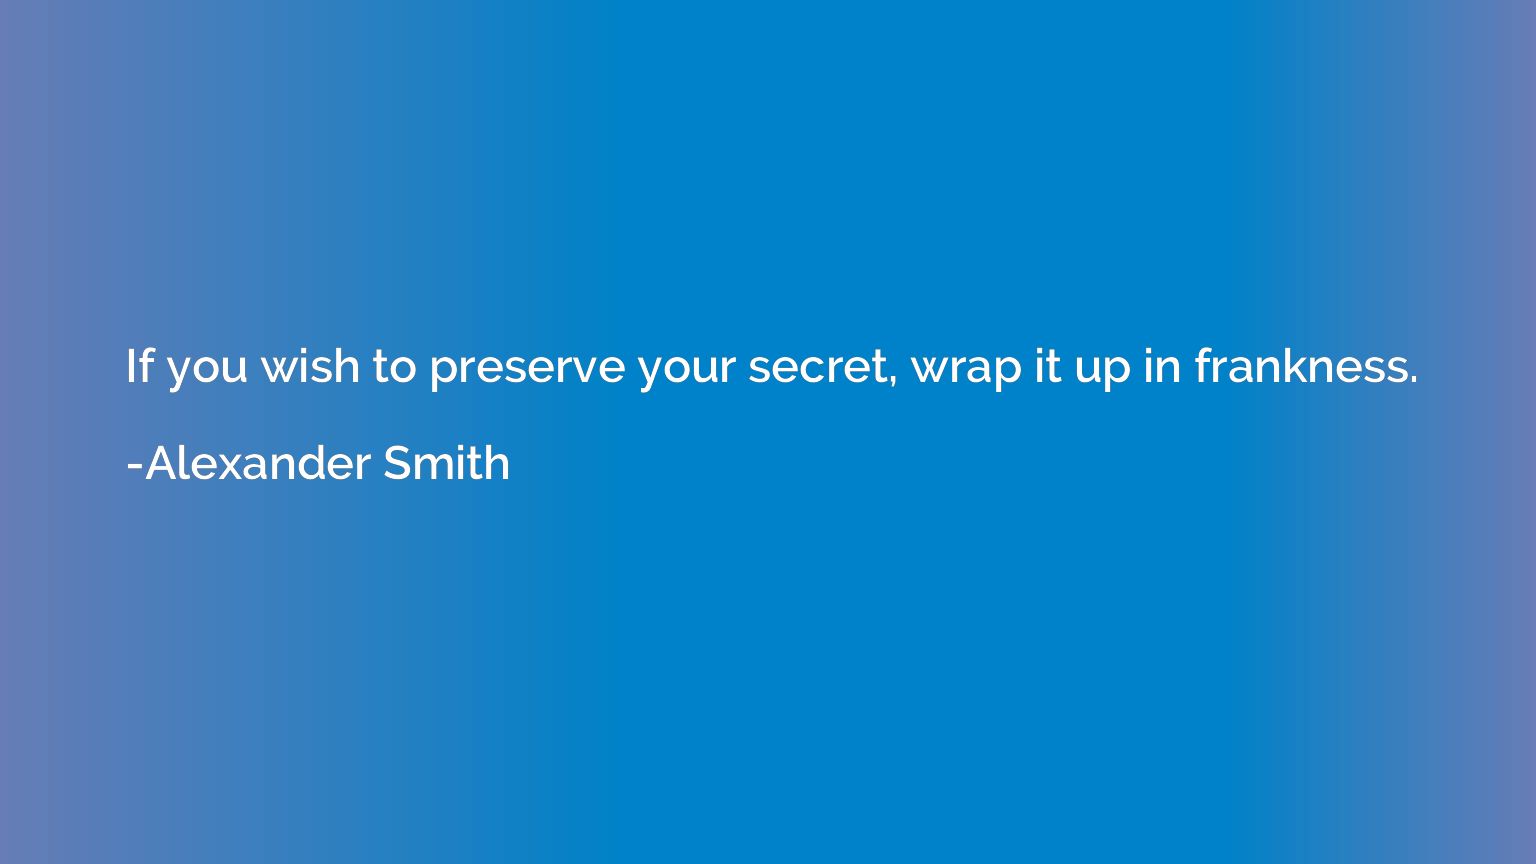 If you wish to preserve your secret, wrap it up in frankness